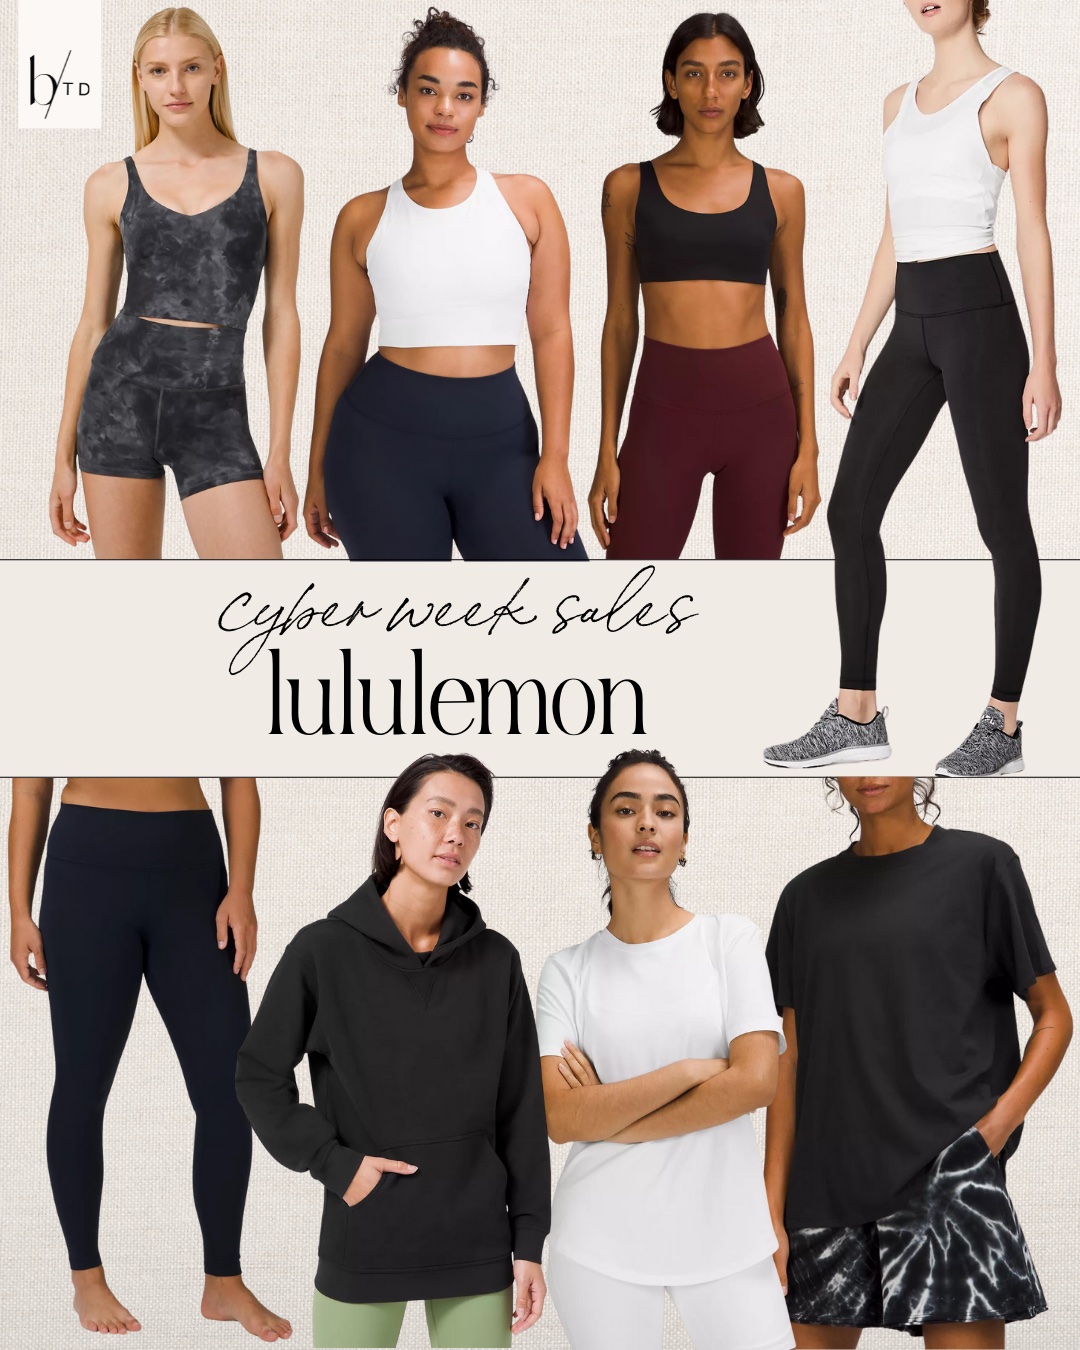 lululemon gift guide for her cyber week sales 